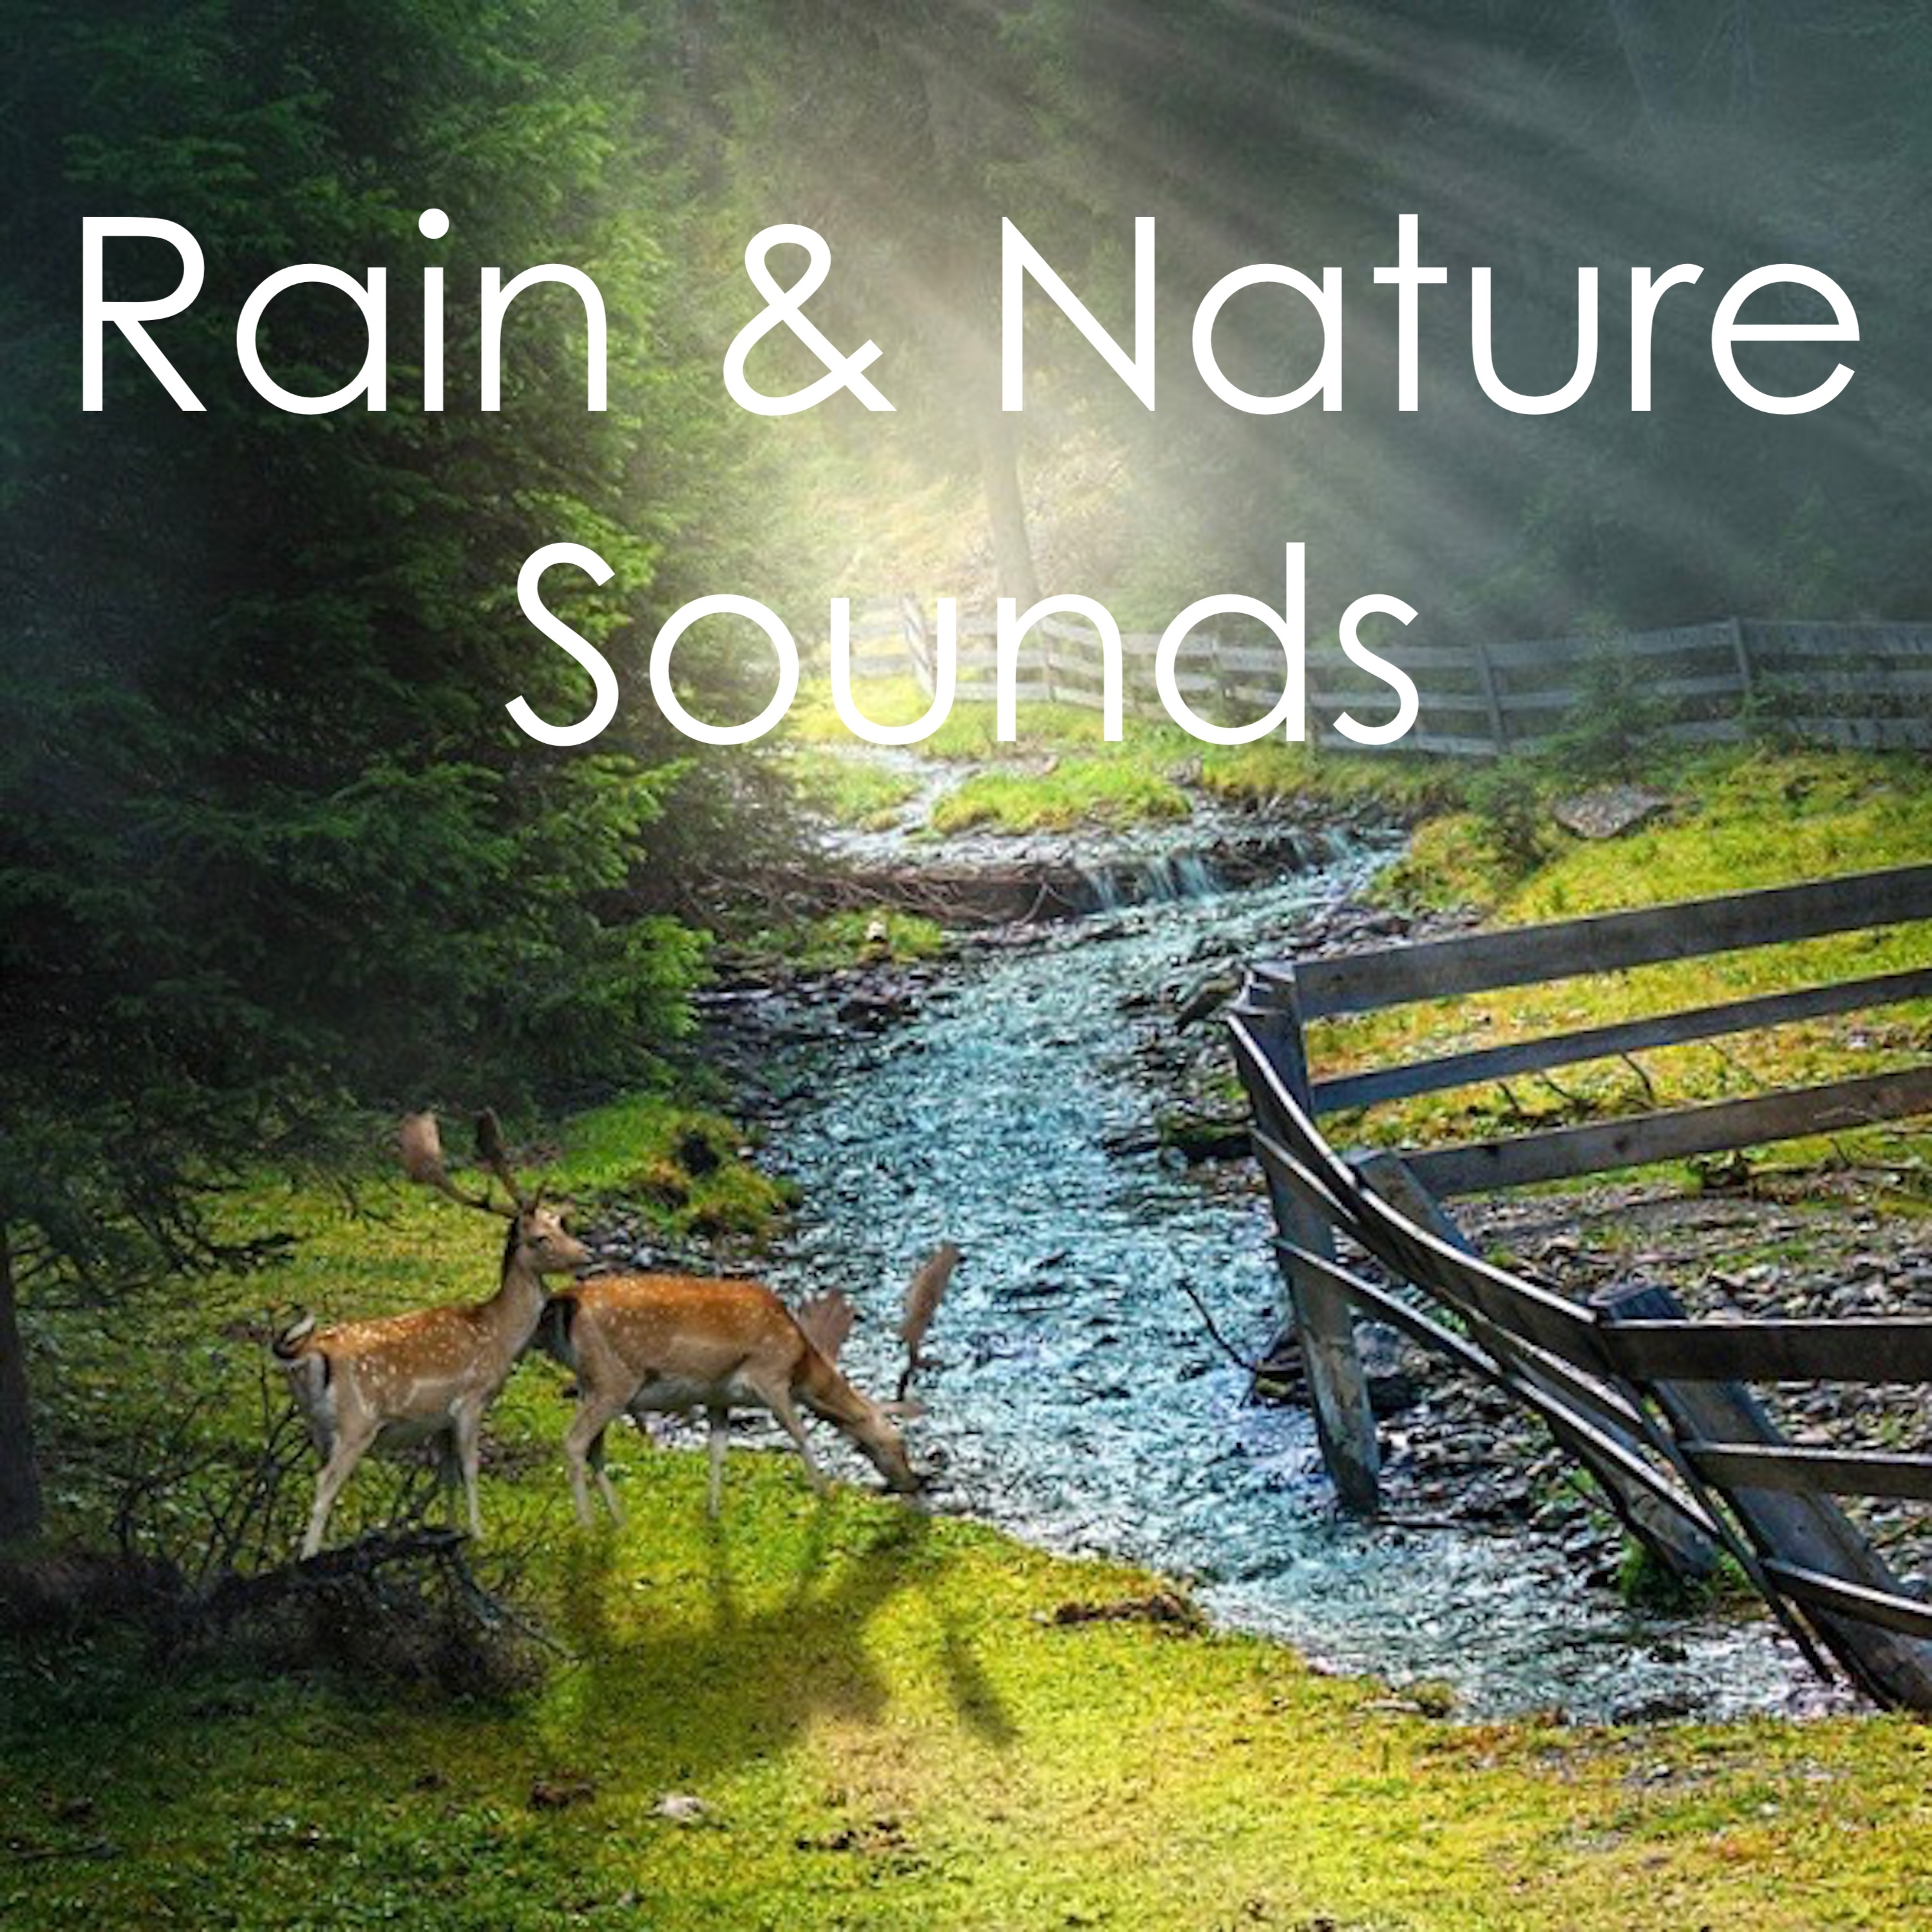 15 Rain and Nature Sounds to Relieve Stress